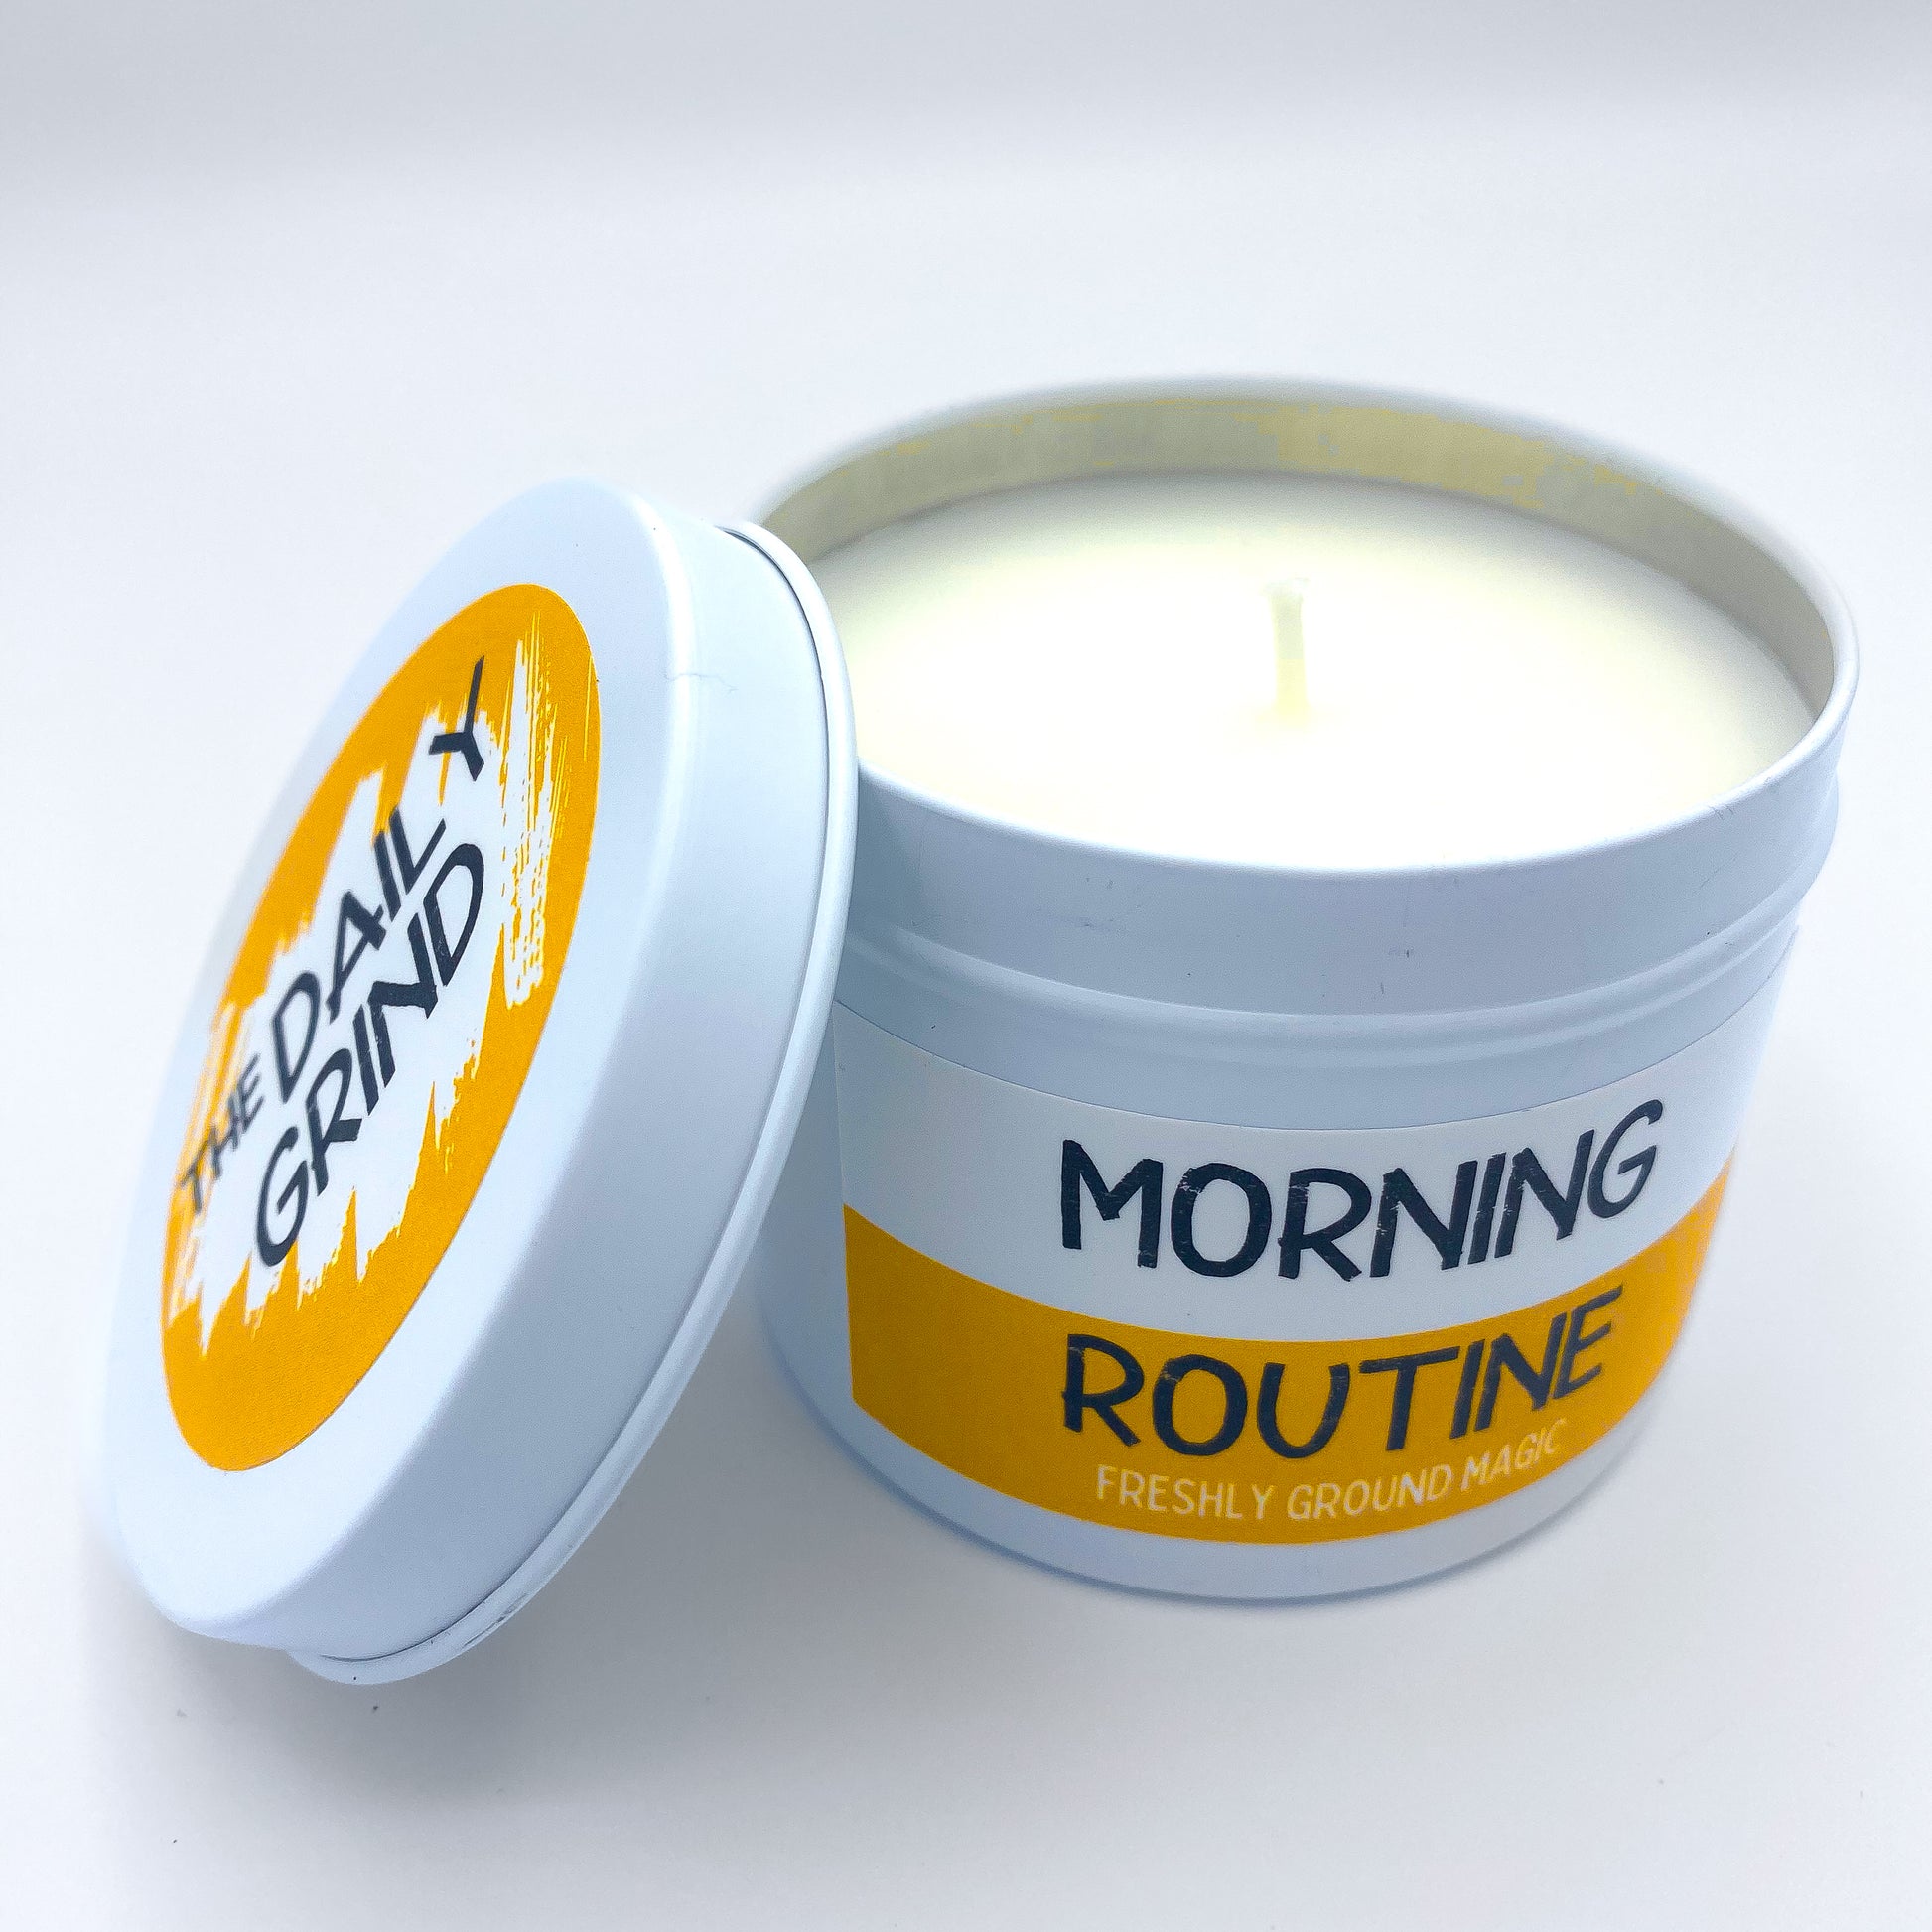 Unlit "Morning Routine" candle in white tin